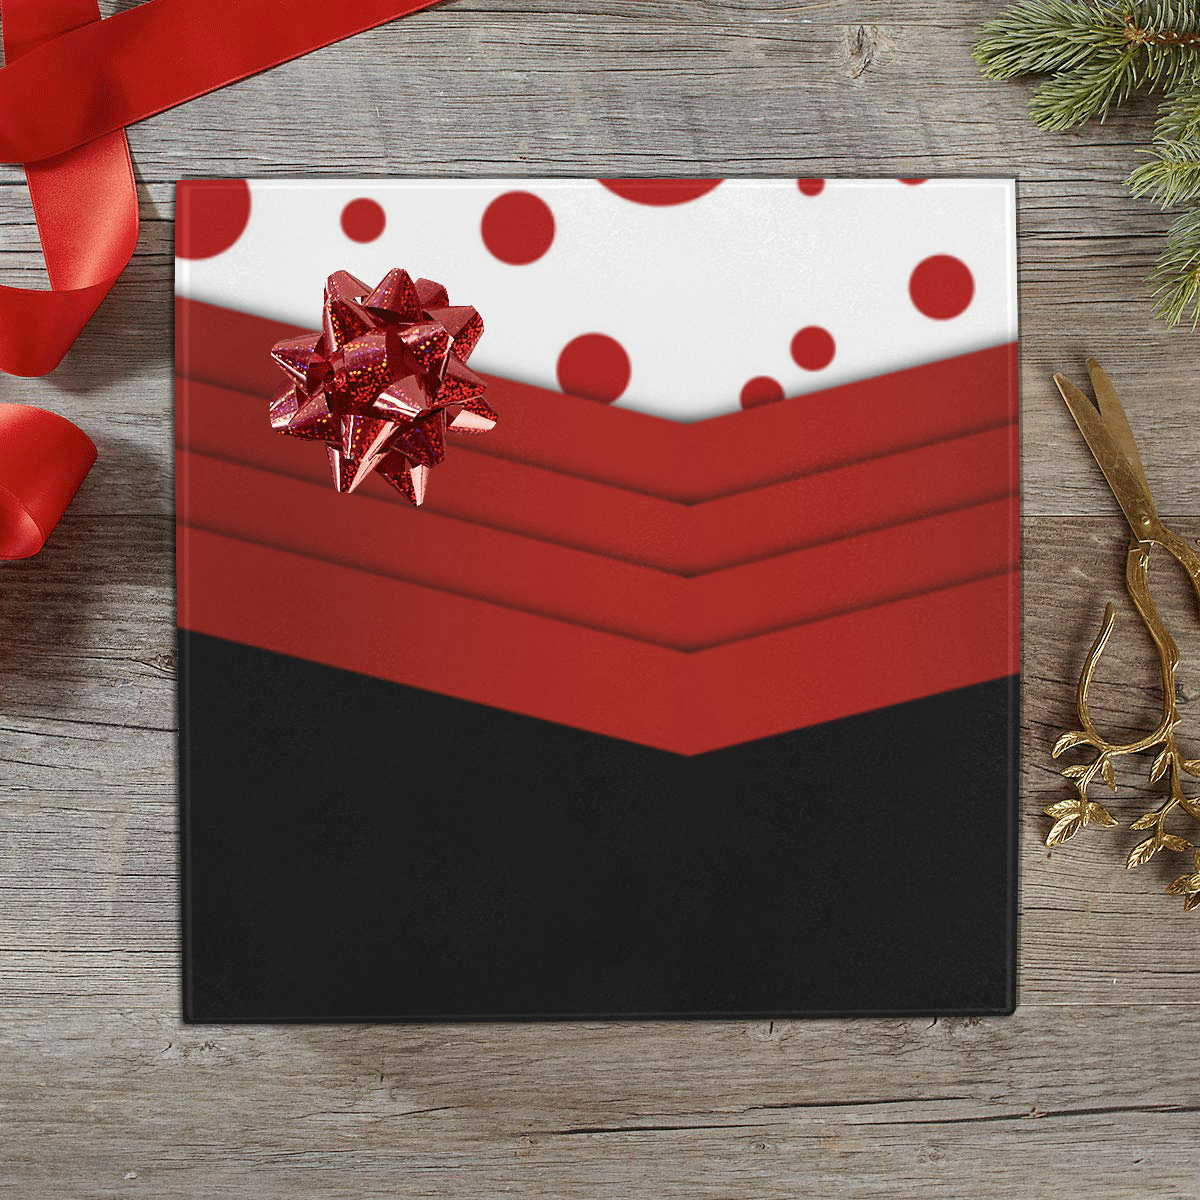 Polka Dots and Red Sash on Black Gift Wrapping Paper 58"x 23" (3 Rolls)